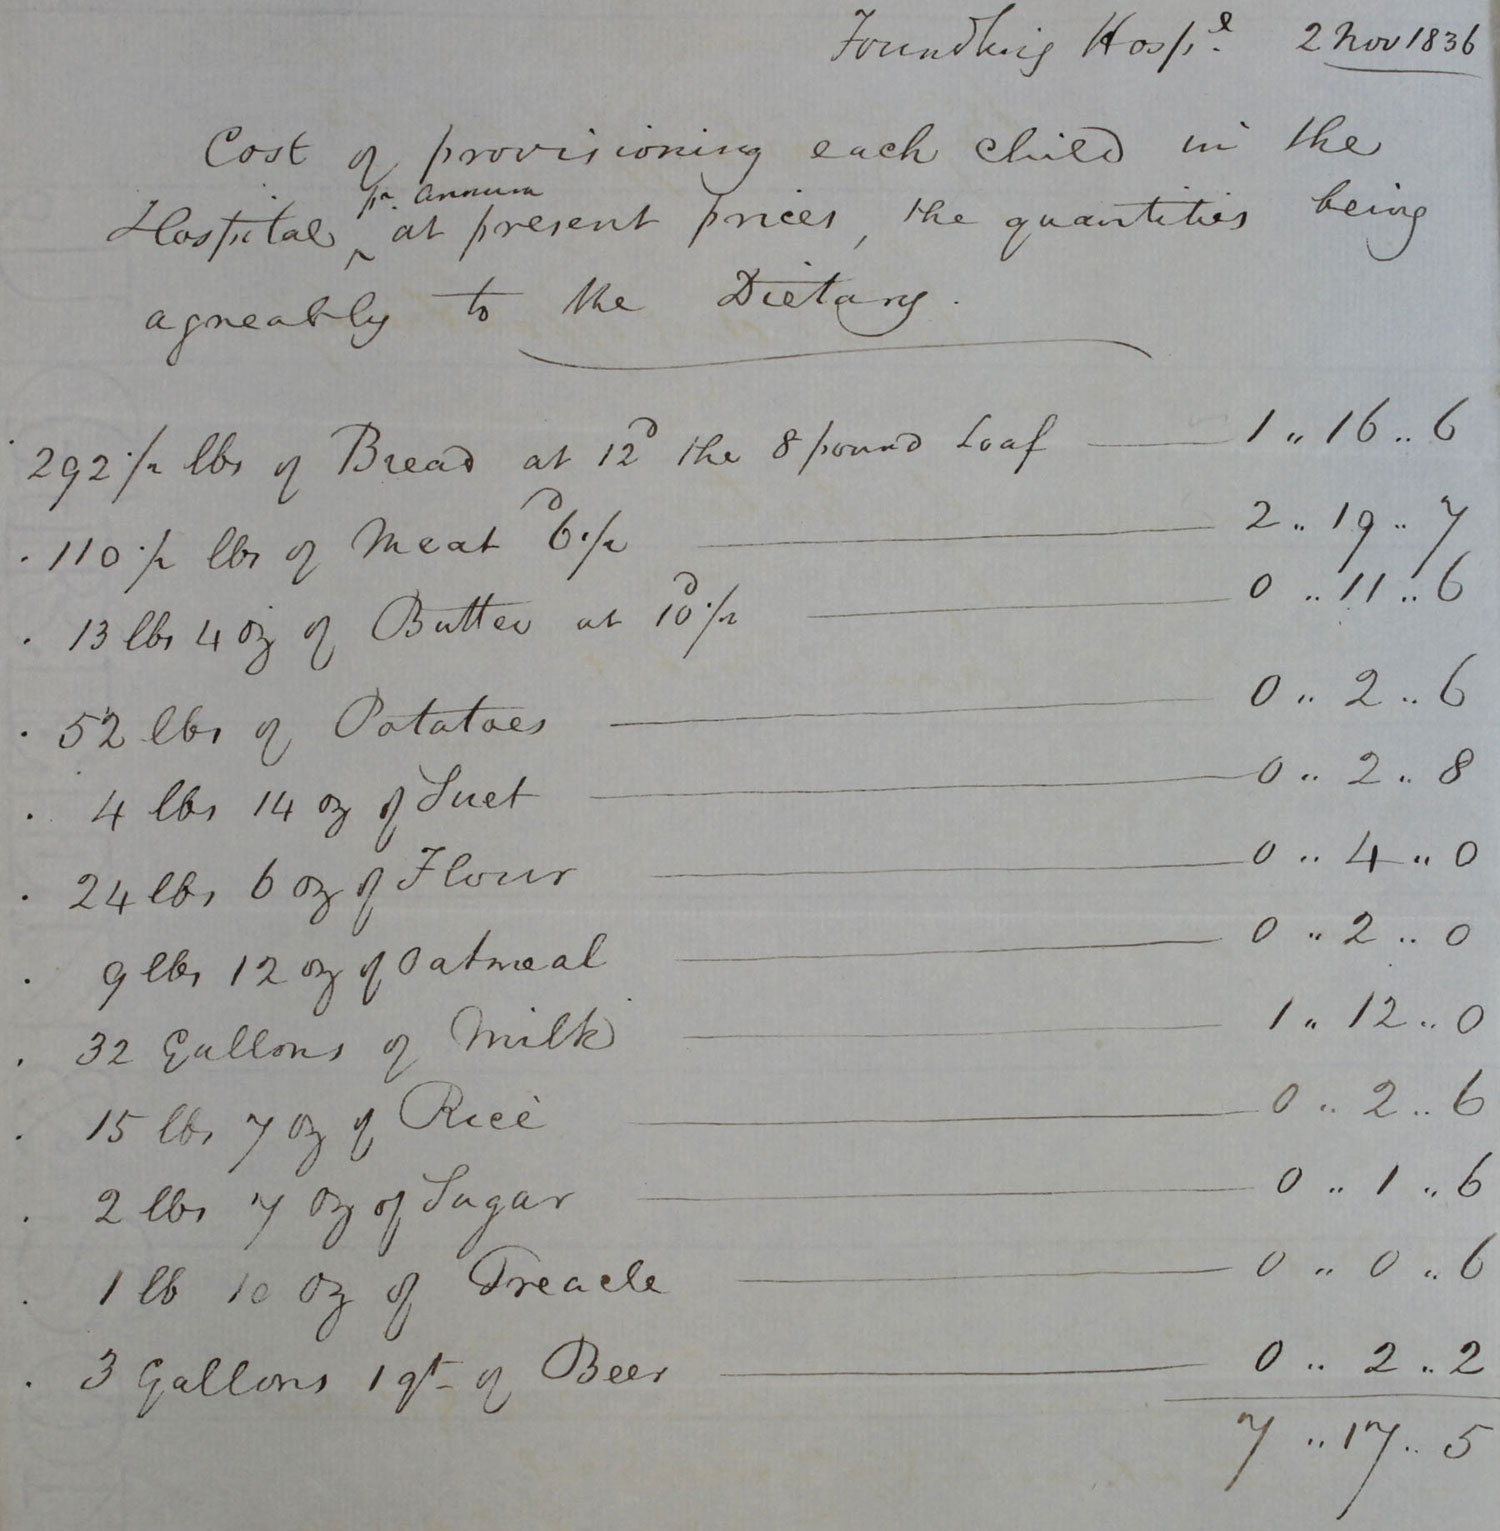 The cost of feeding children at the Foundling Hospital, 1836 (CHAR 2/384)